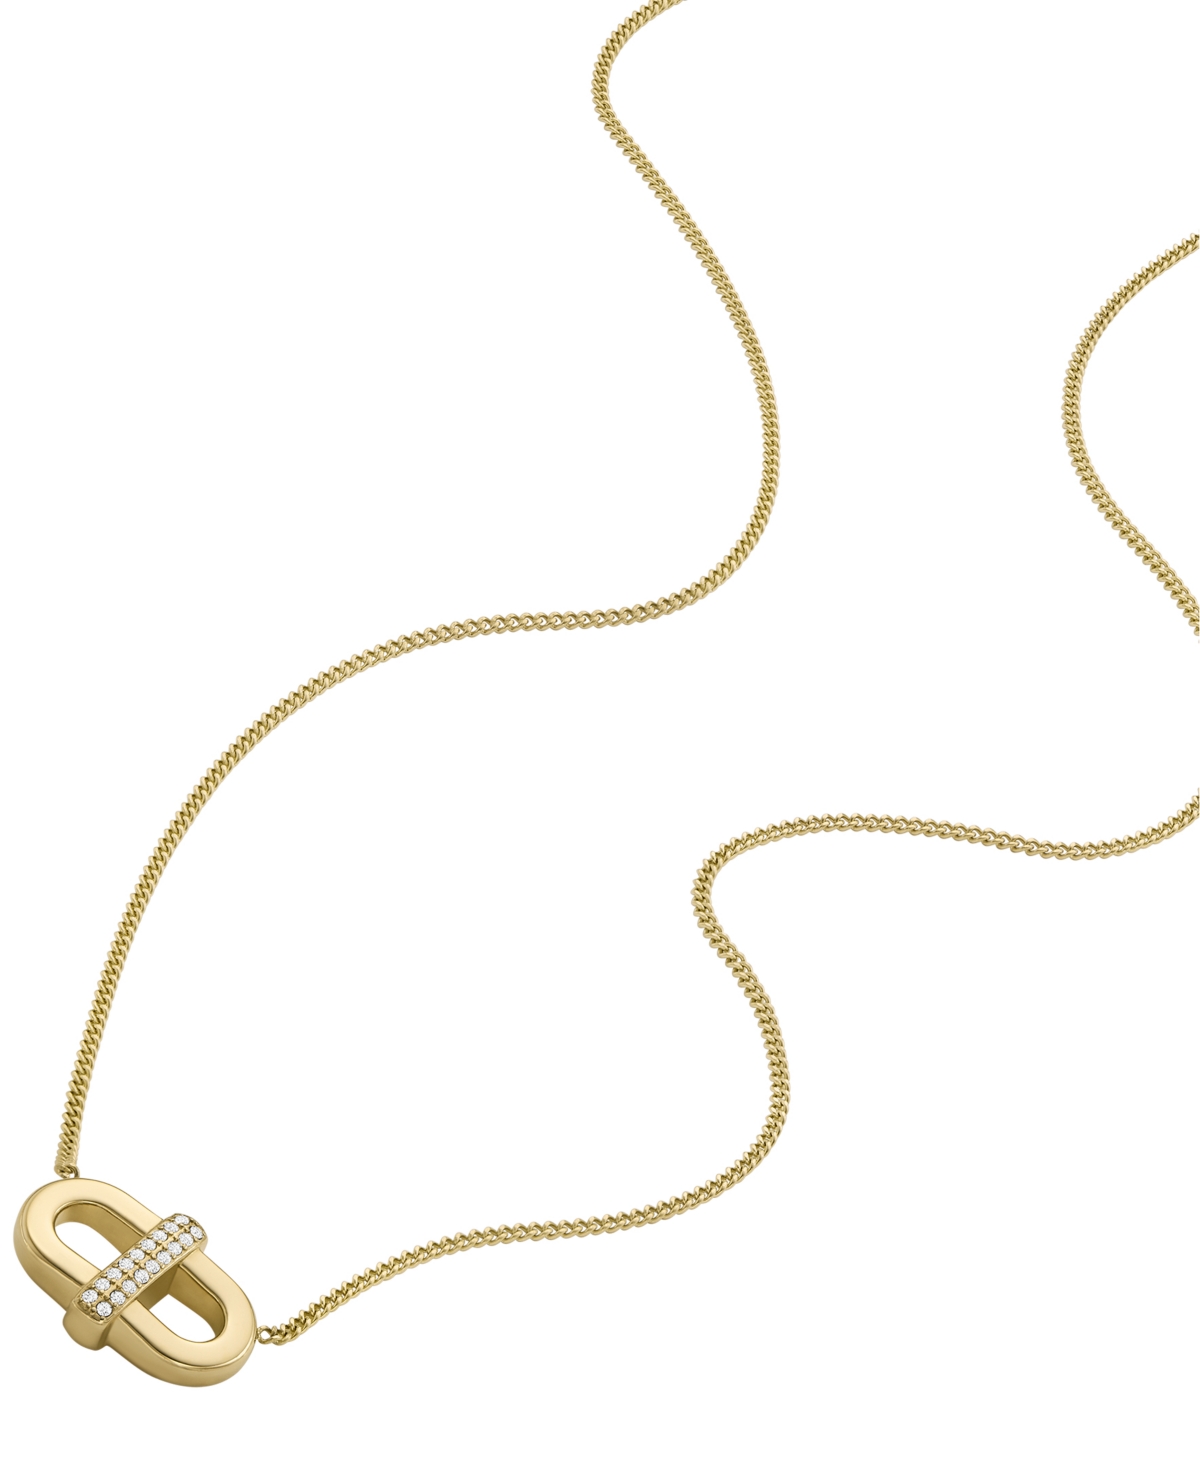 Shop Fossil Heritage D-link Glitz Gold-tone Stainless Steel Chain Necklace